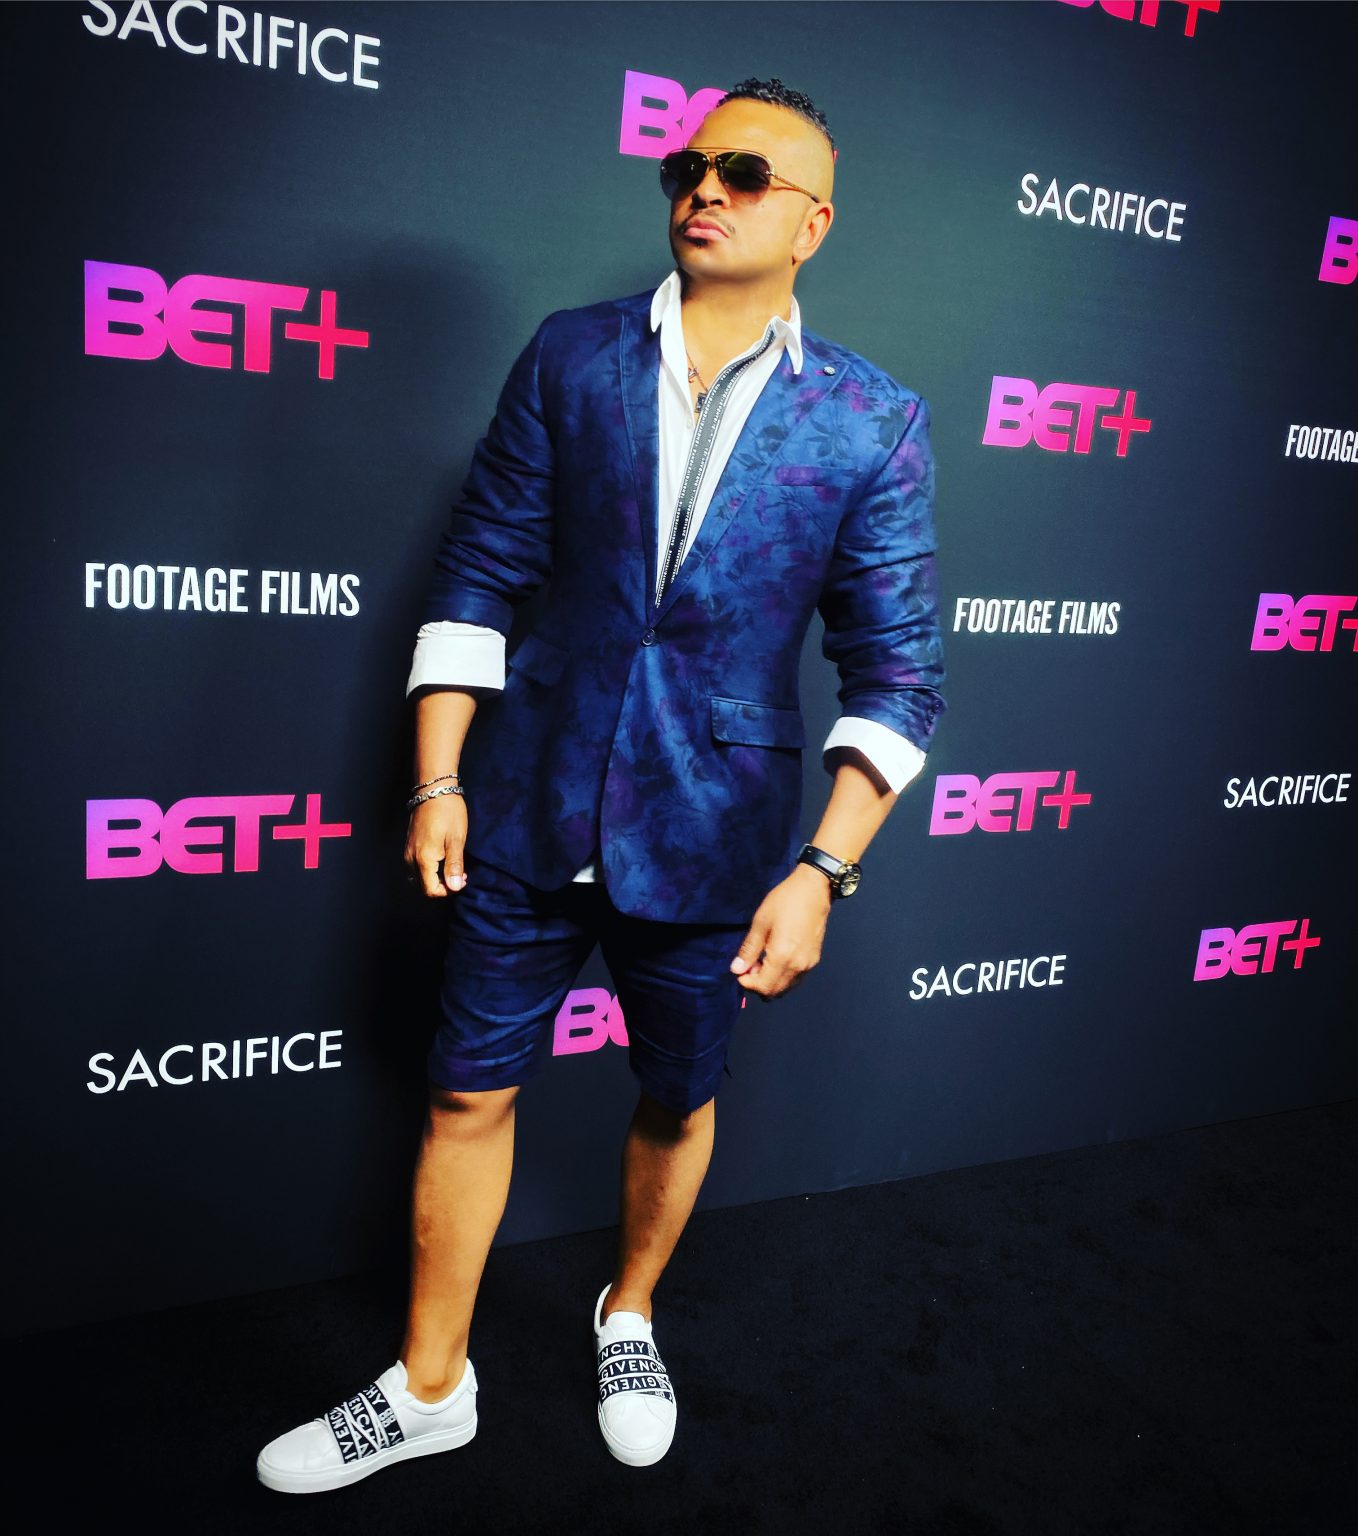 Chris Stokes Attends The Premiere Of His New BET+ Movie "Sacrifice